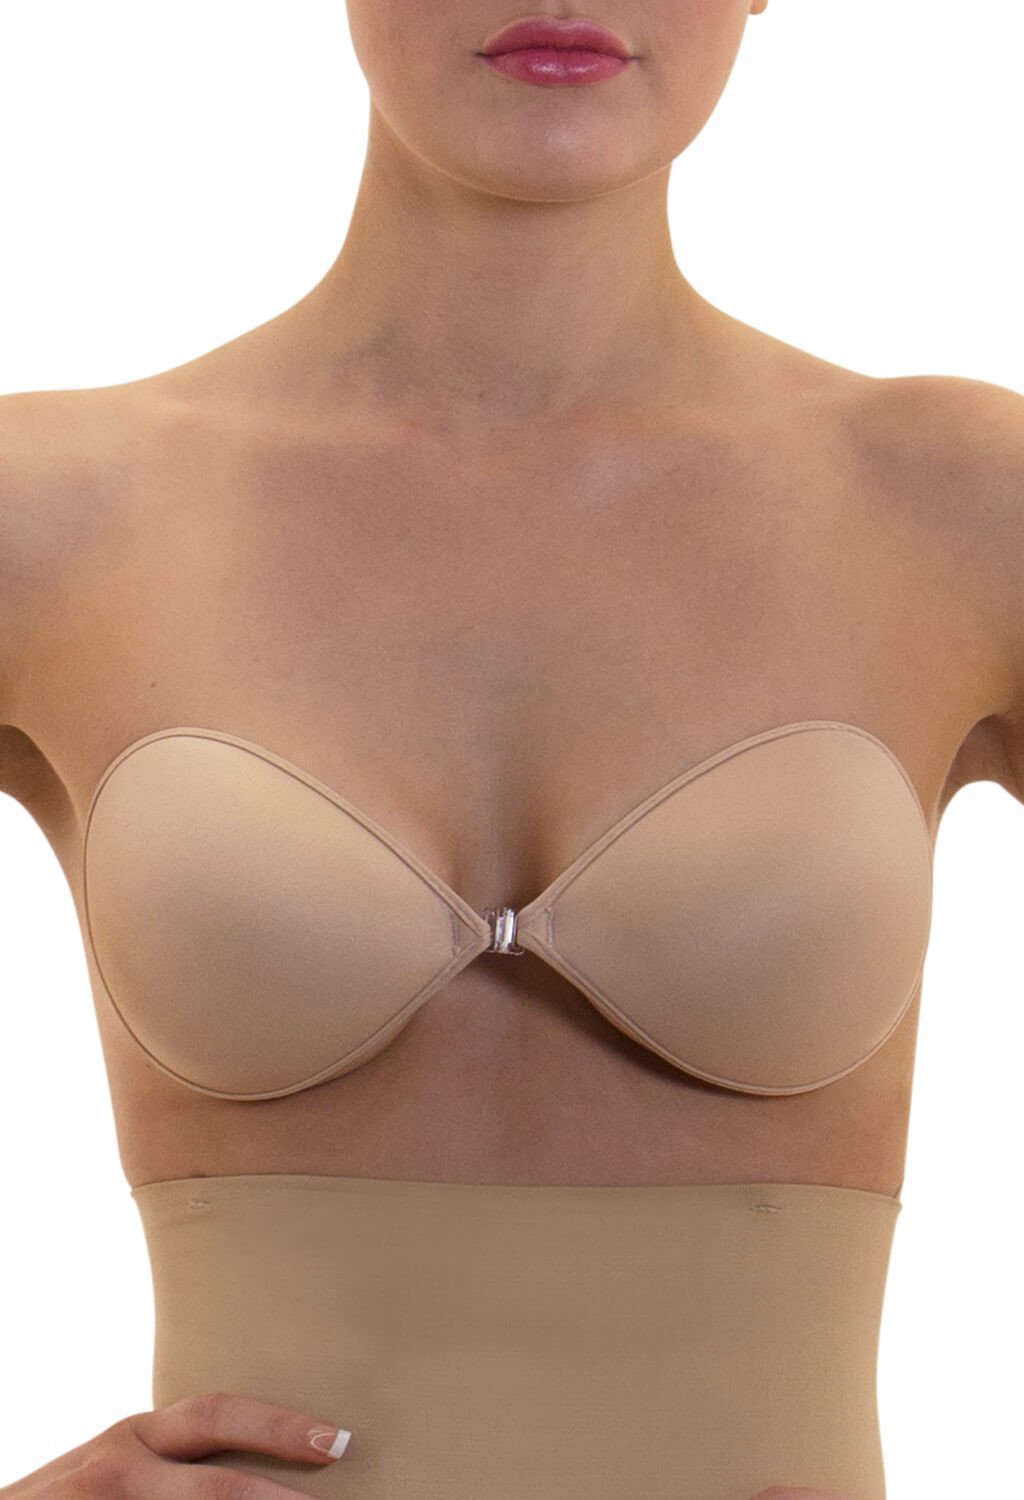 Sleek Stick On Silicone Bra (Nude/Black) - A To F Cup